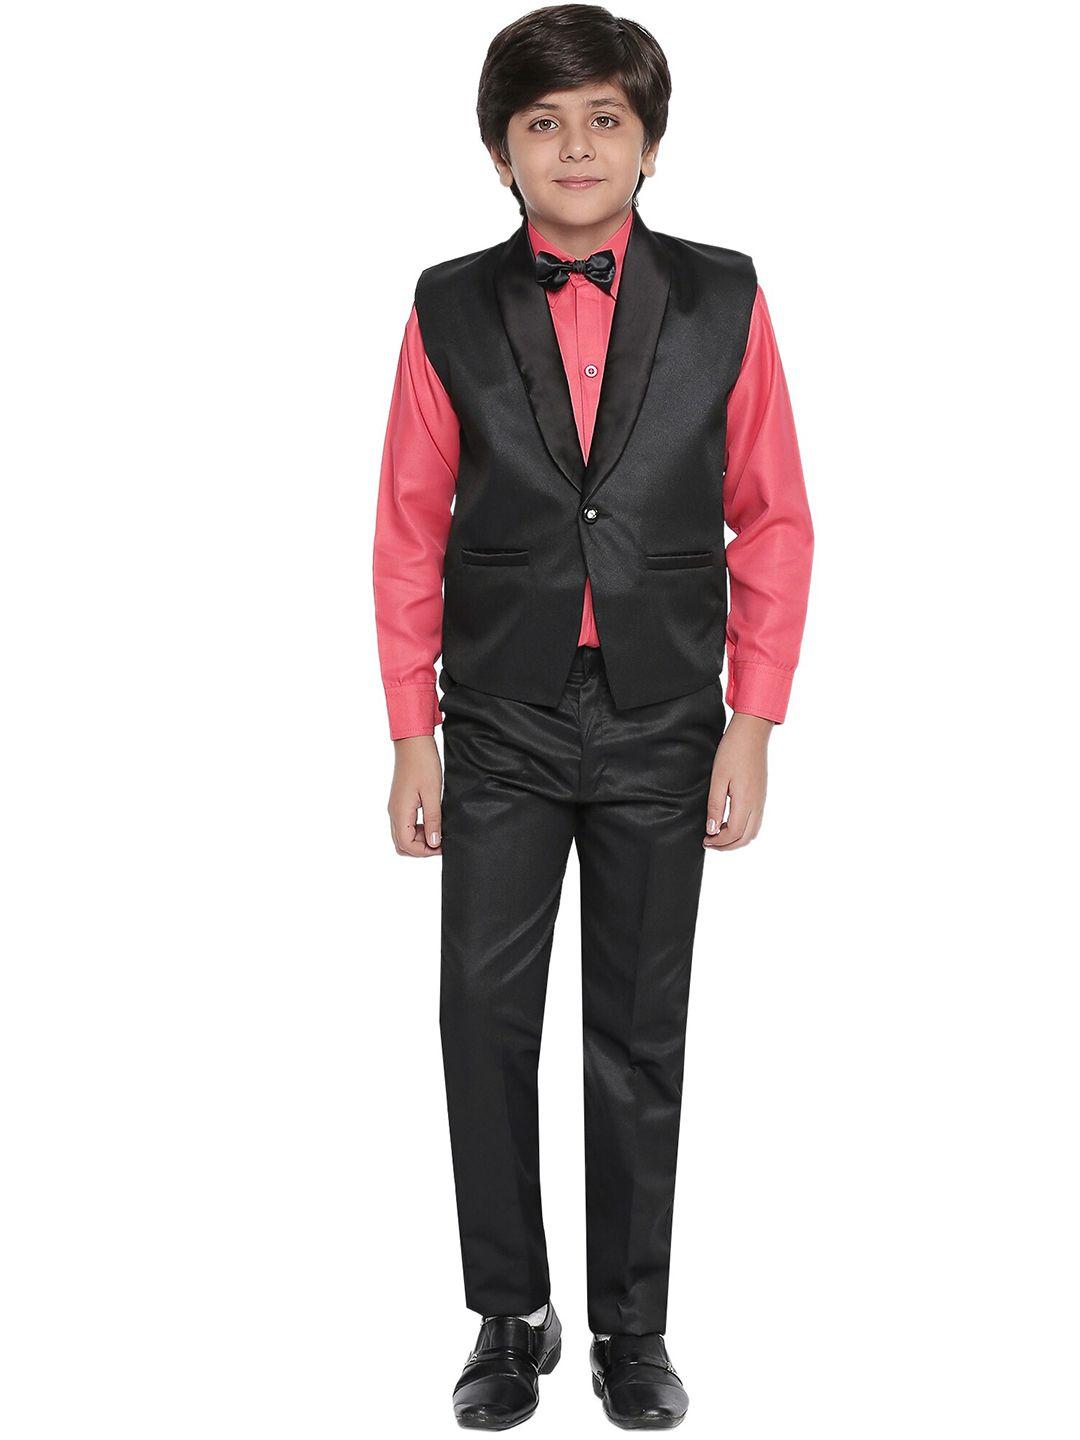 jeetethnics boys coral red & black shirt with trousers & waistcoat